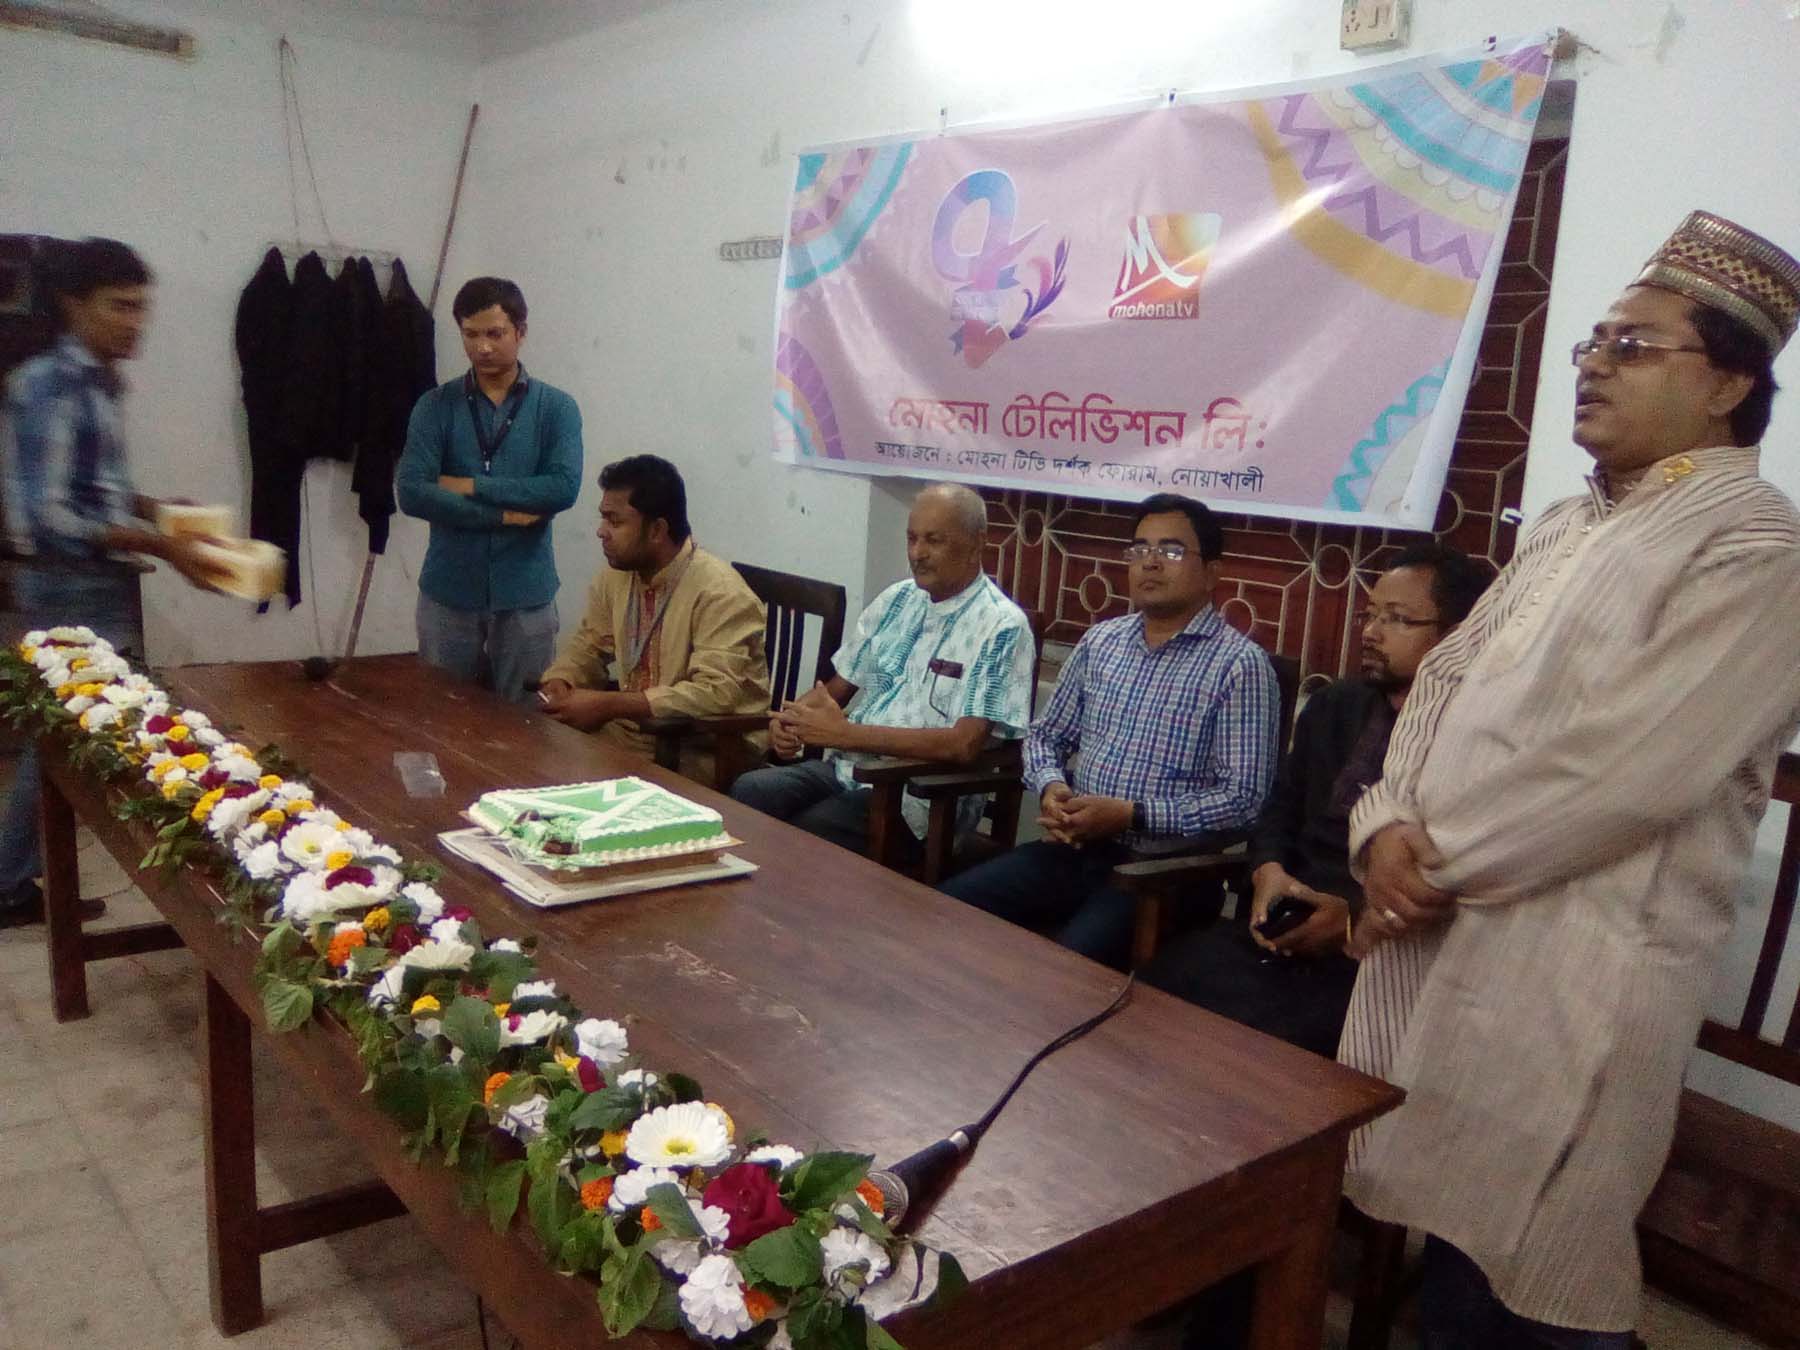 In the picture- Chairman of Begamganj-Sonaimuri Shikkha O Sastha Unnayan Foundation and Begumganj Technical and Computer Institute Principal Gias Uddin Mithu with speaks as guest on the occasion of the inauguration anniversary of Mohana TV.